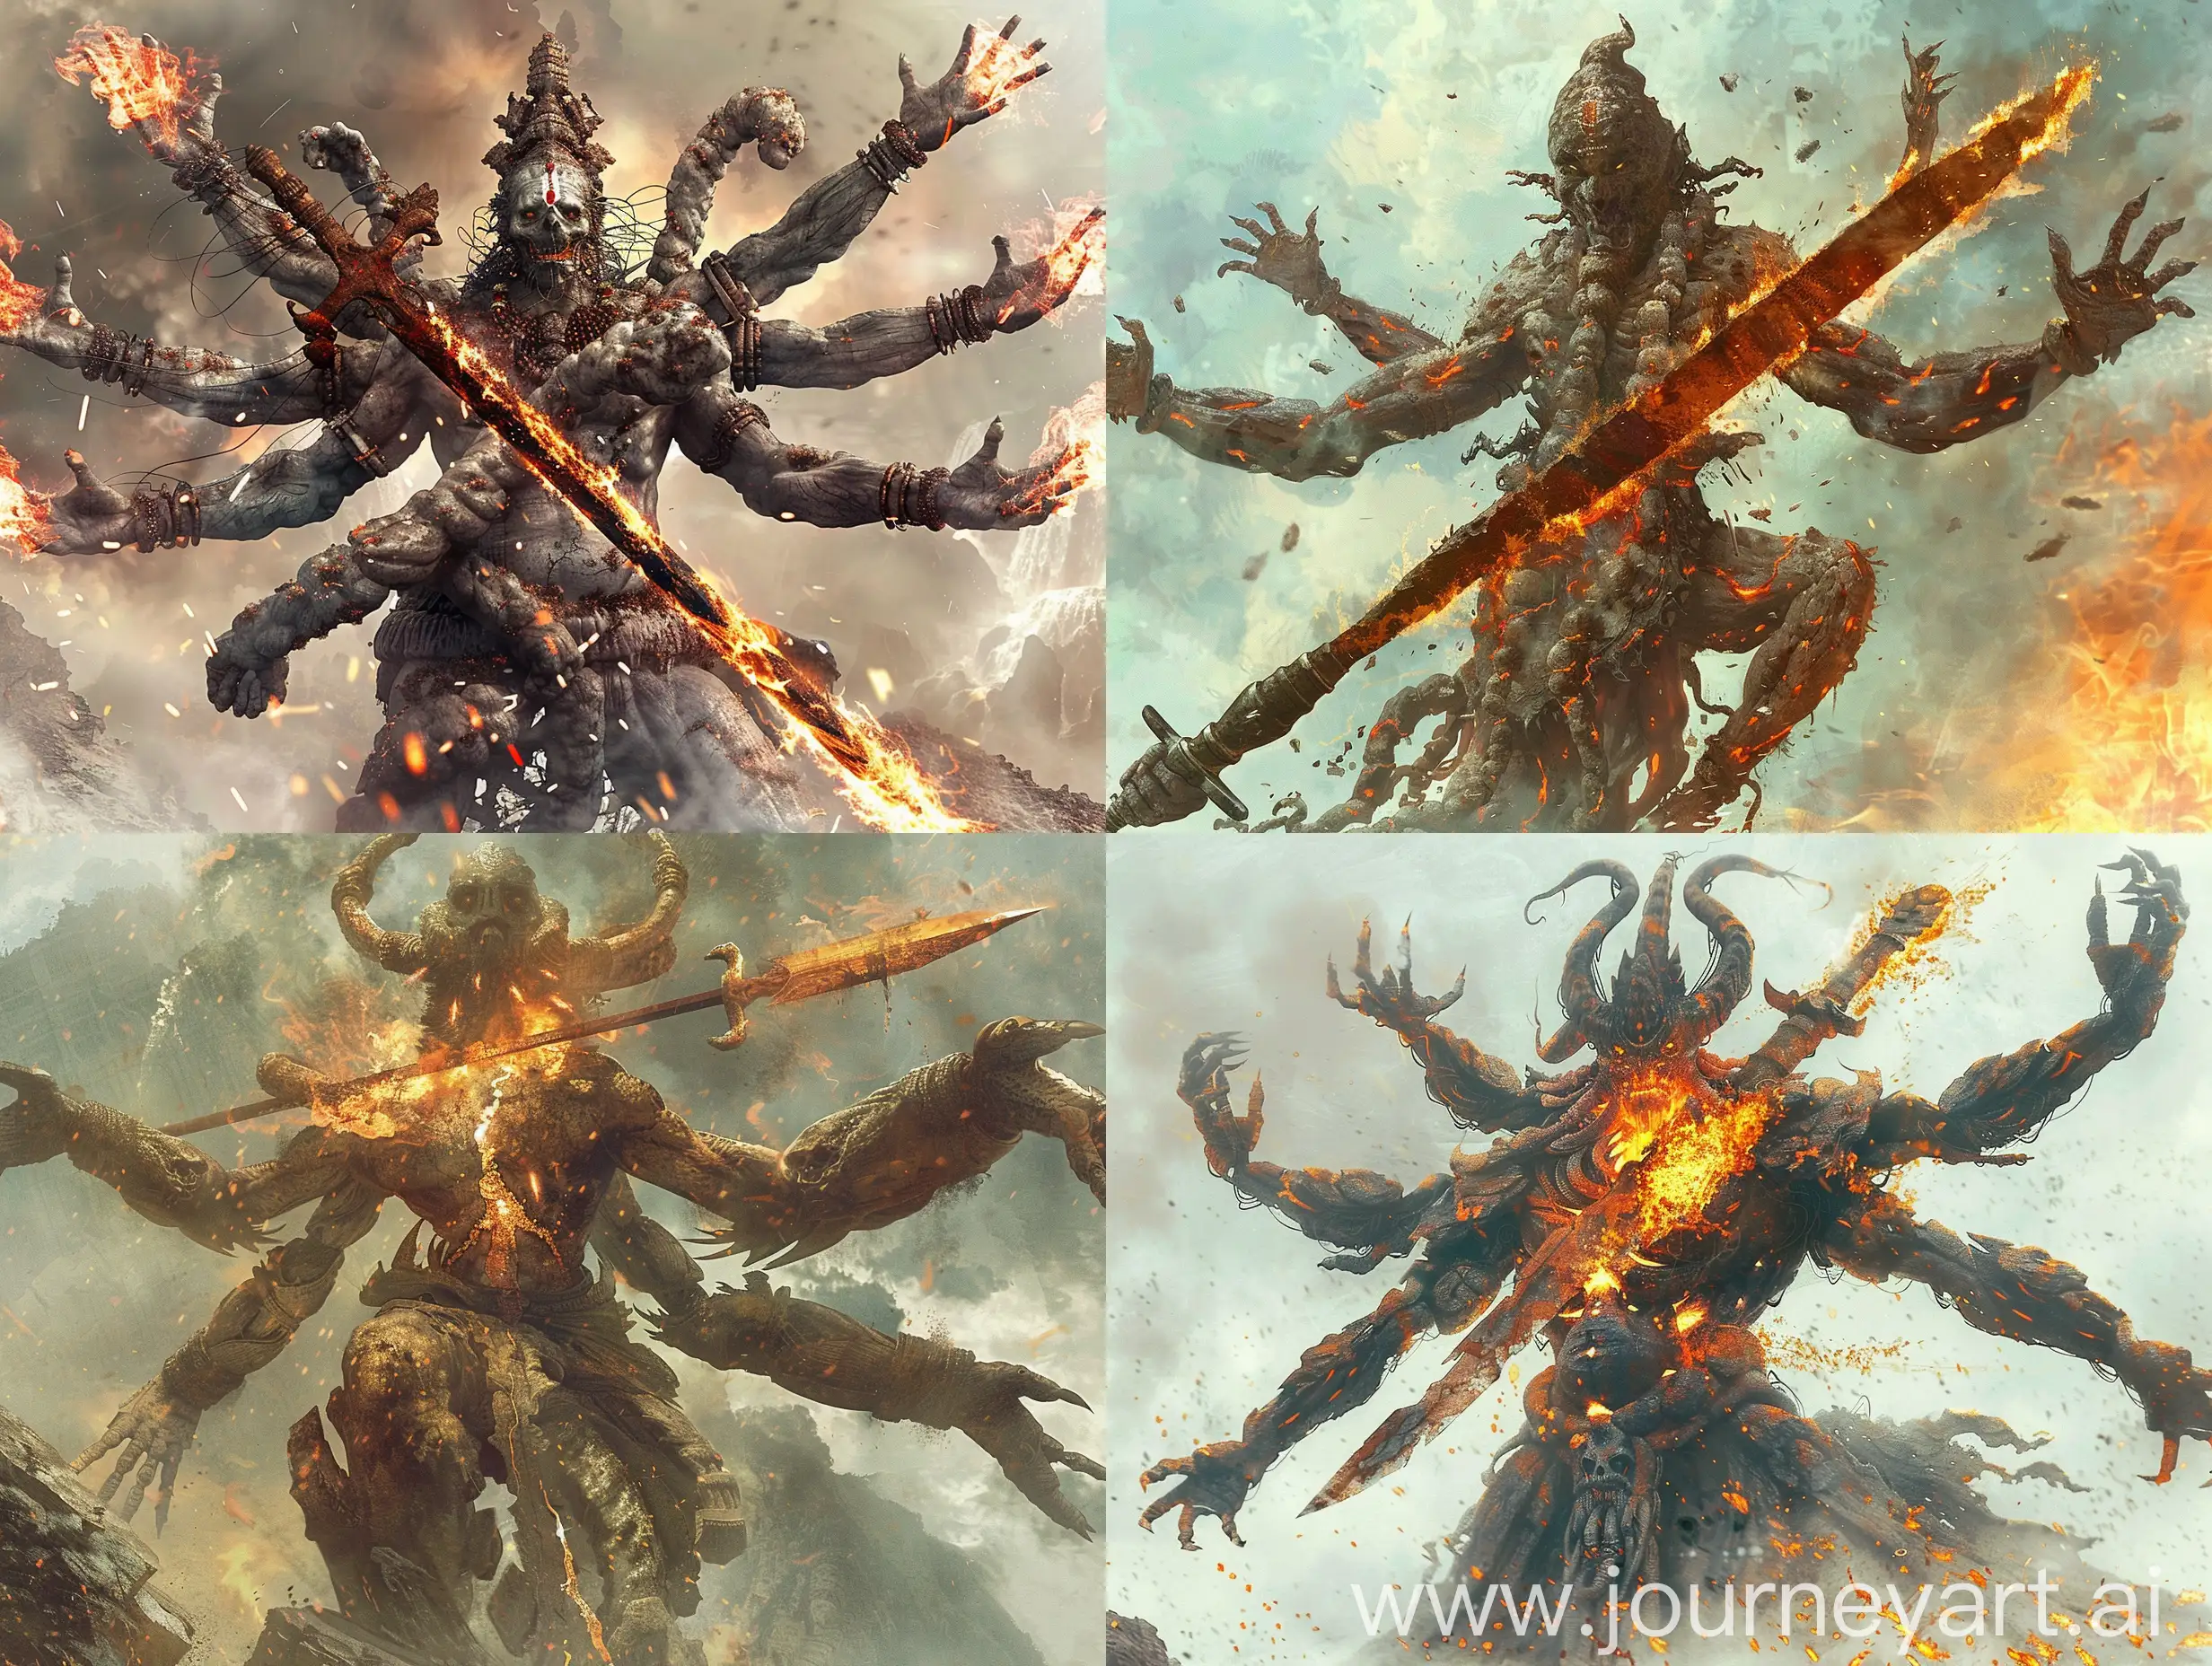 An eldritch God of extinction Giant Eldritch god God of death Humanoid Multiple humanoid arms Taller than mountains Arms reaching out in multiple directions humanoid arms vishnu Weilding giant executioner's sword Flames erupting from body weilding fire rusted sword chipped blade cosmic horror eldritch being Giant enormous miles high resolution realistic detailed Image